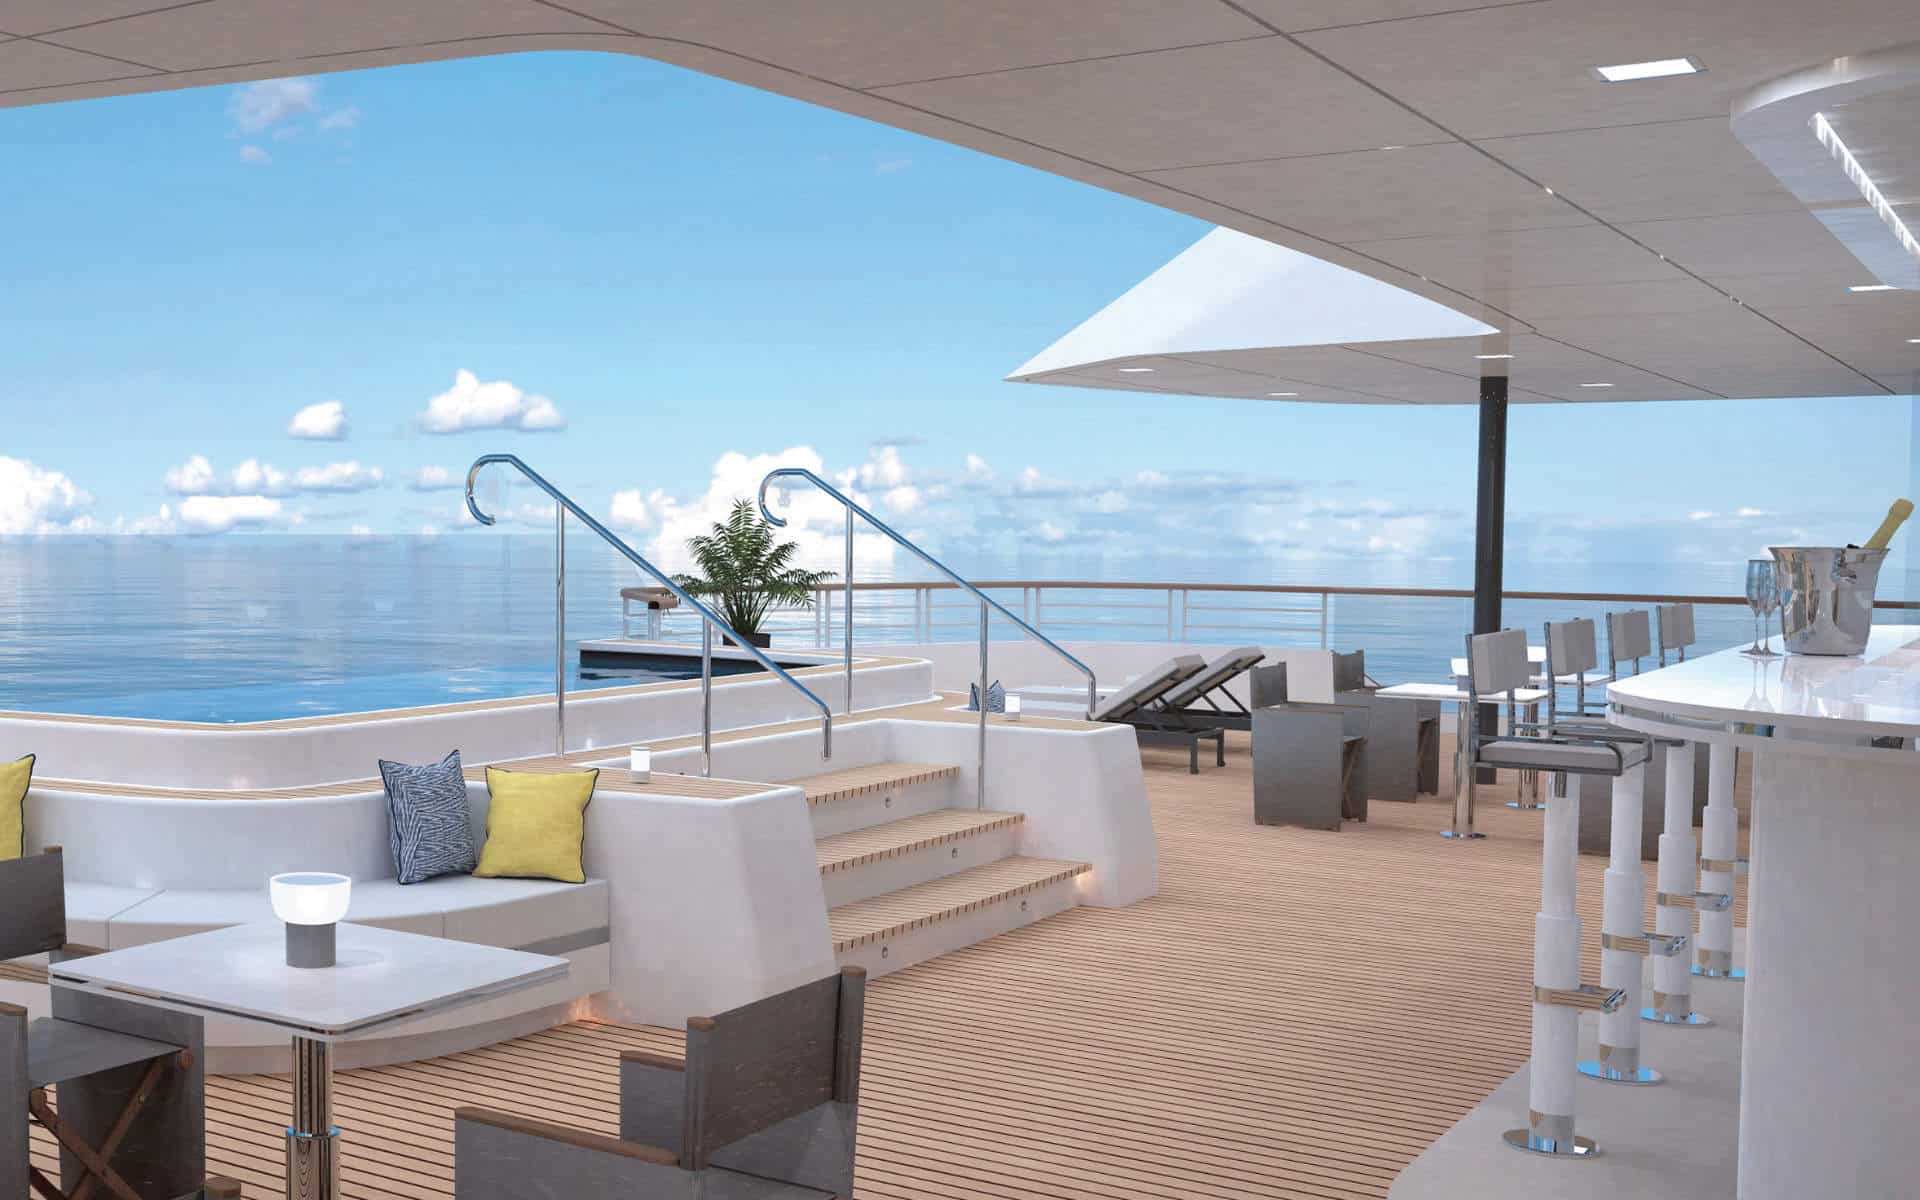 The Ritz-Carlton Yacht Collection delay means guests will have to wait to enjoy onboard amenities.